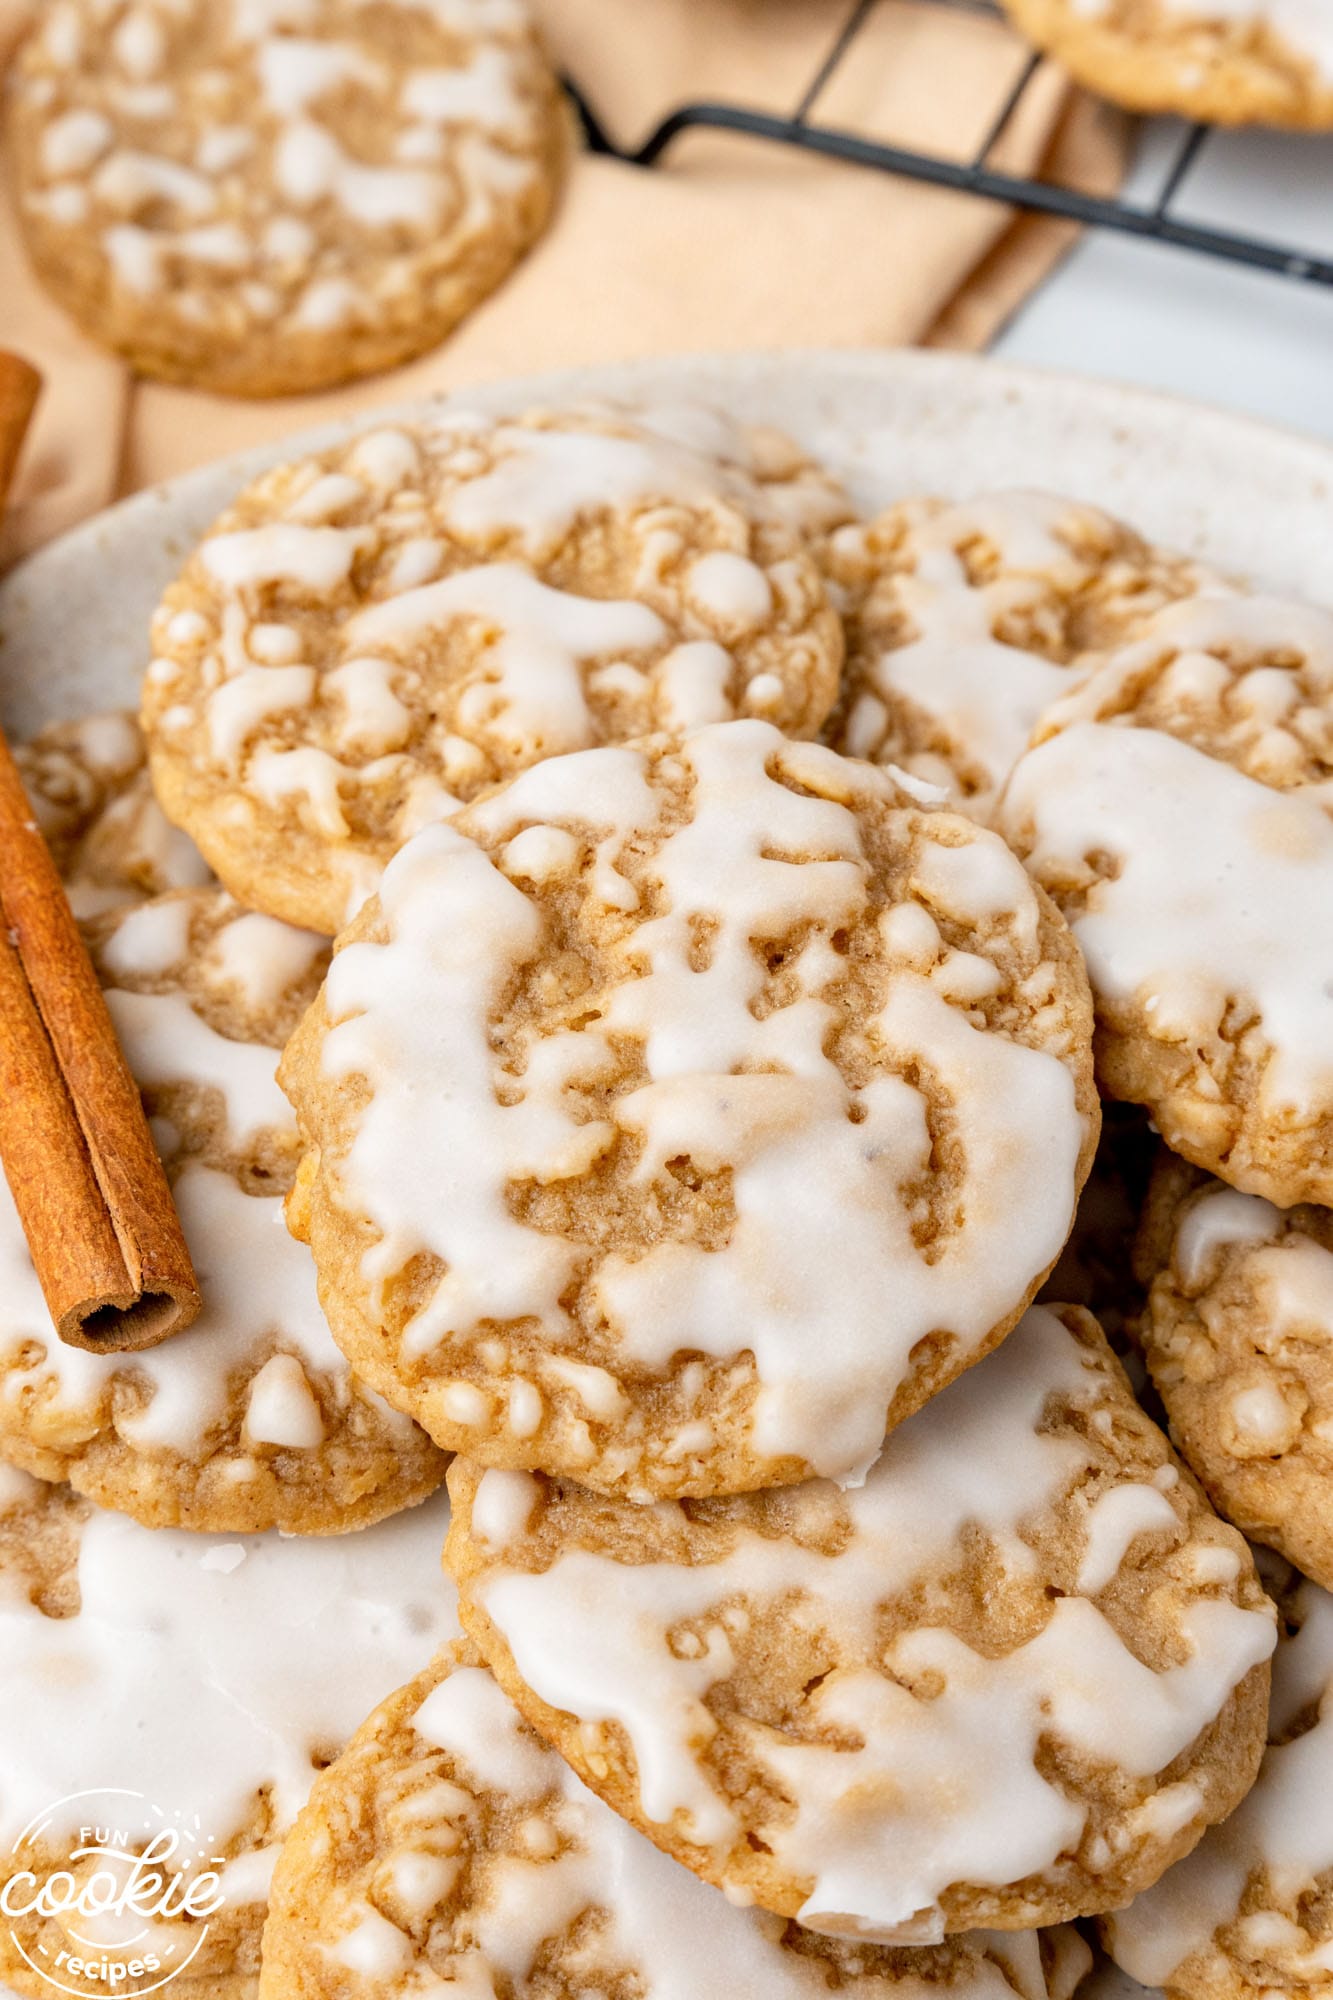 iced oatmeal cookies on a plate, garnished with a cinnamon stick.